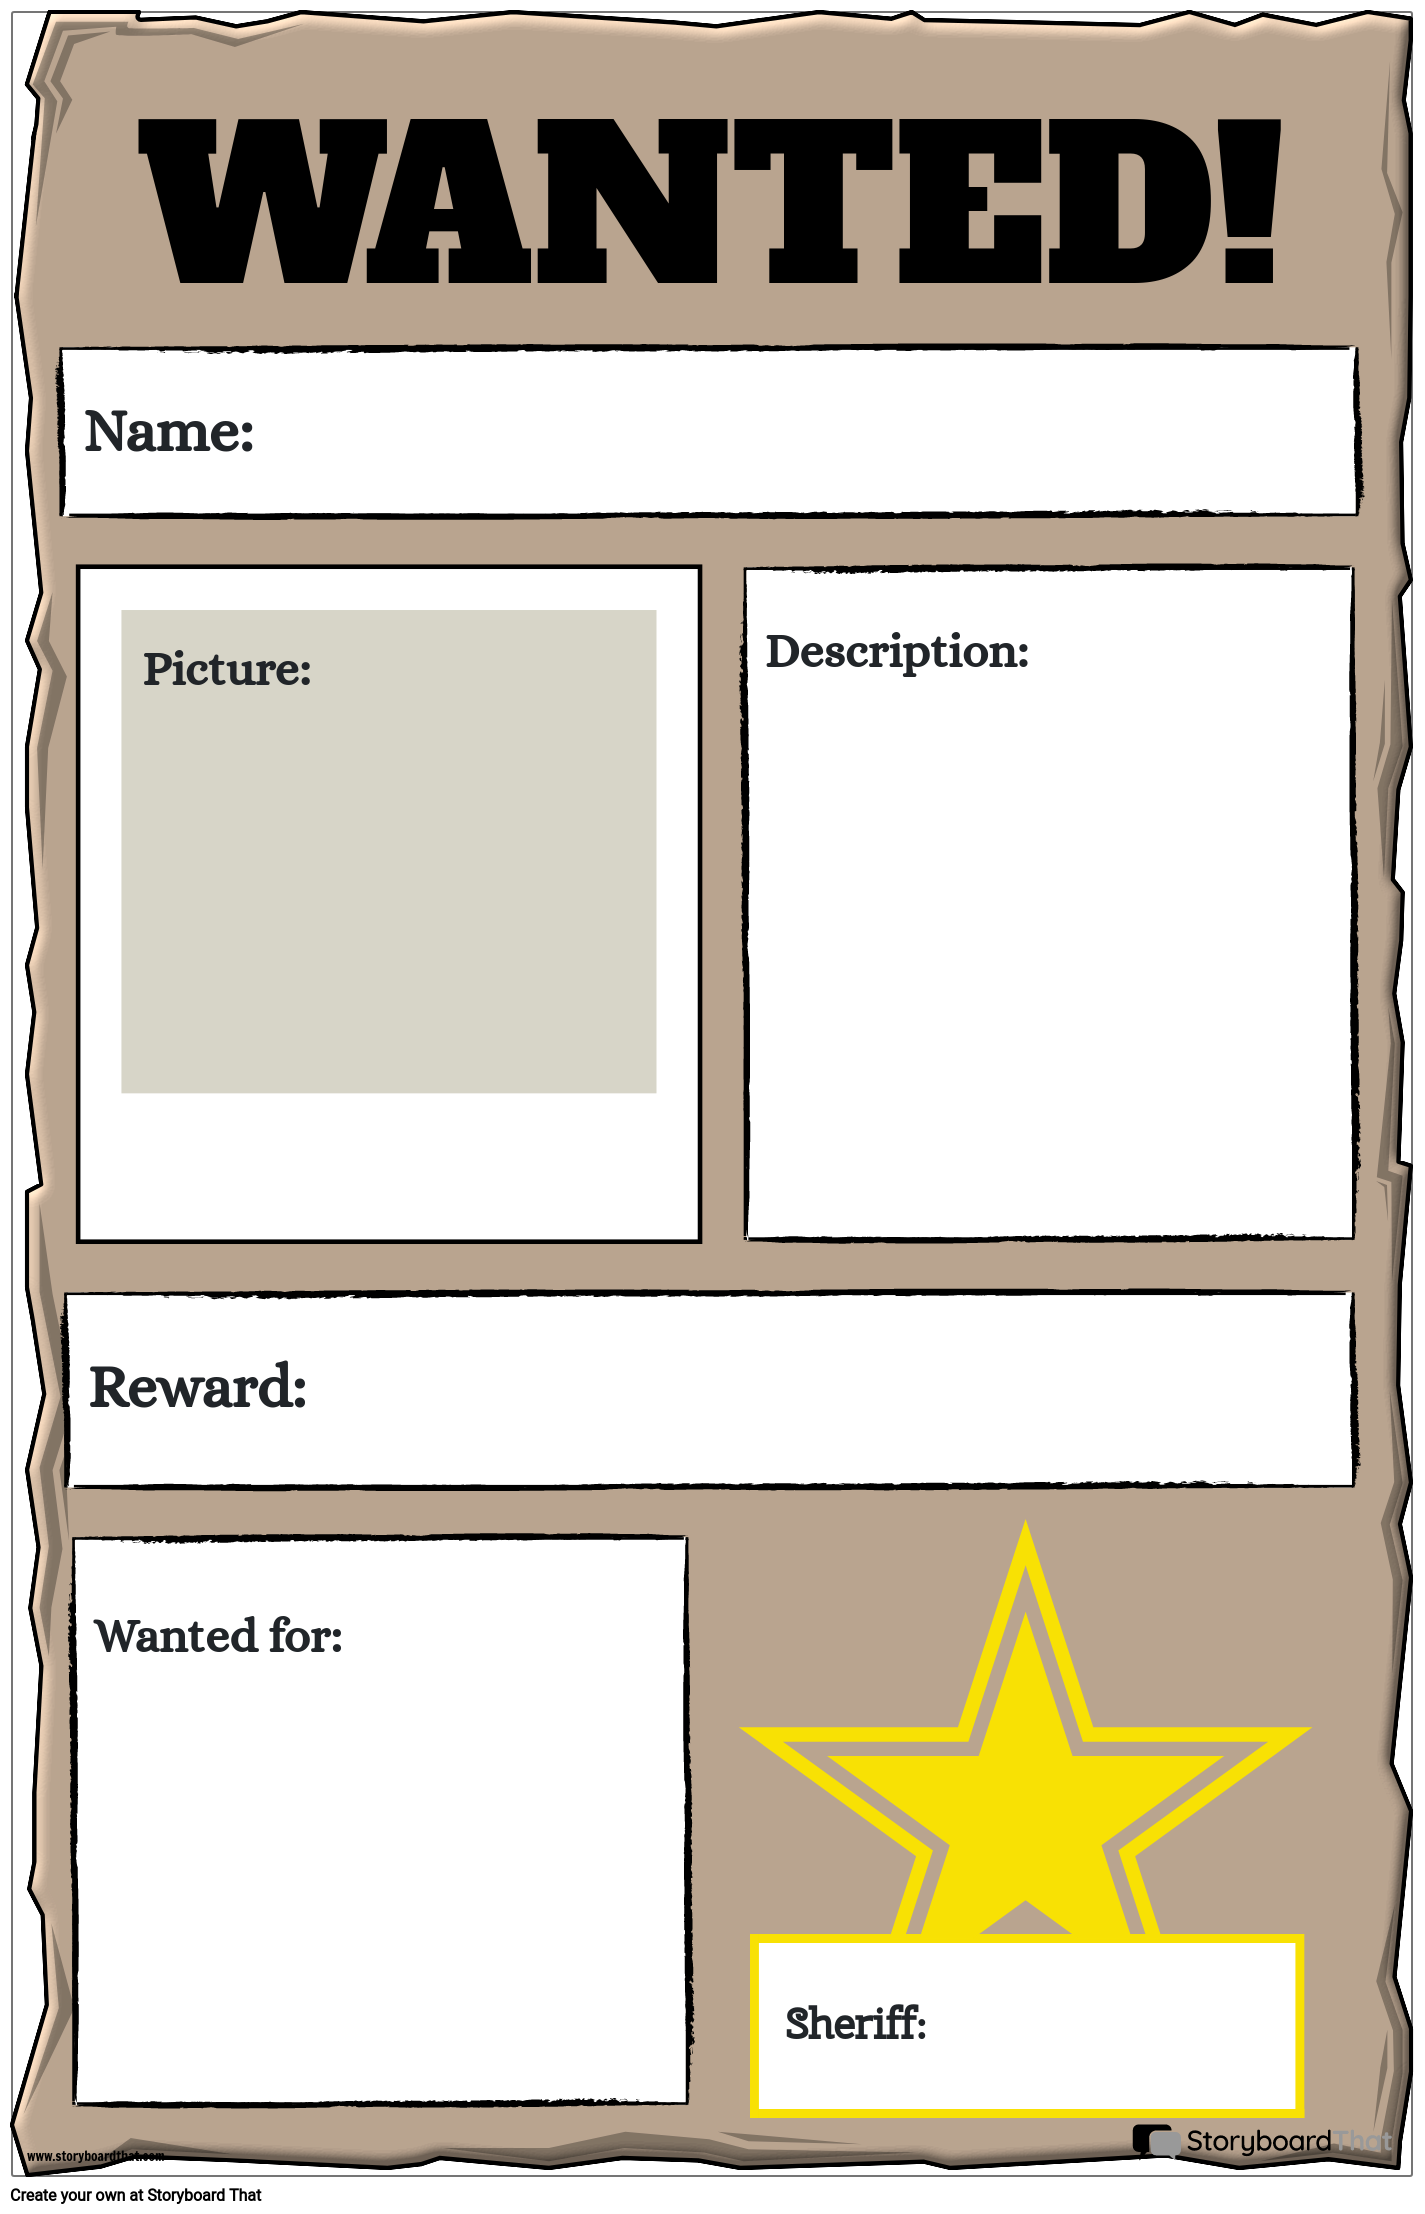 sammenhængende krone terrorisme Wanted Poster Template for Students | Create Wanted Posters | Storyboard  That